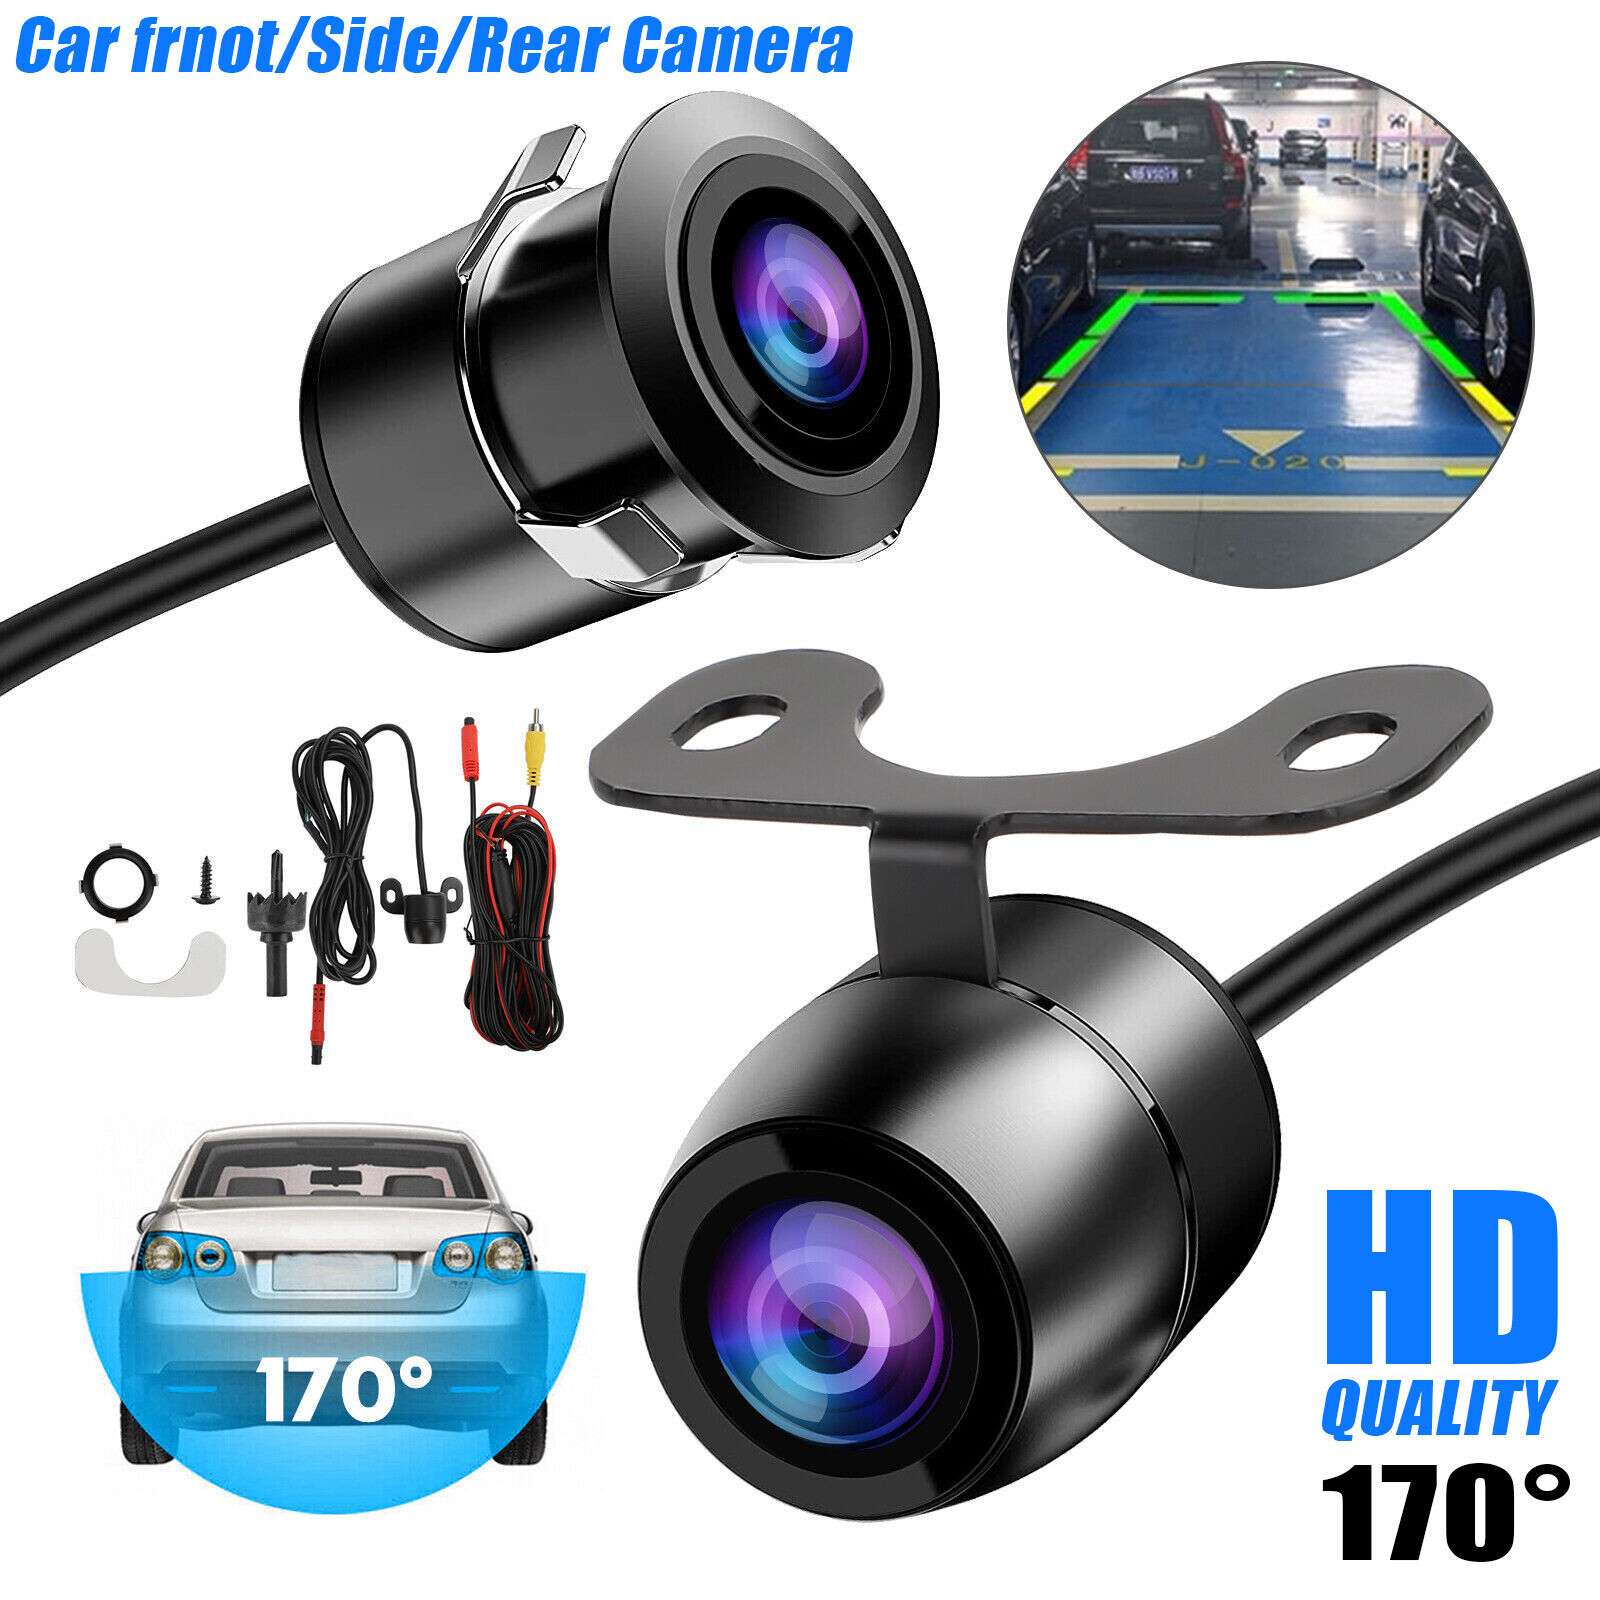 170° CMOS Car Front/Side/Rear View Reverse Backup Night Vision Parking Camera HD